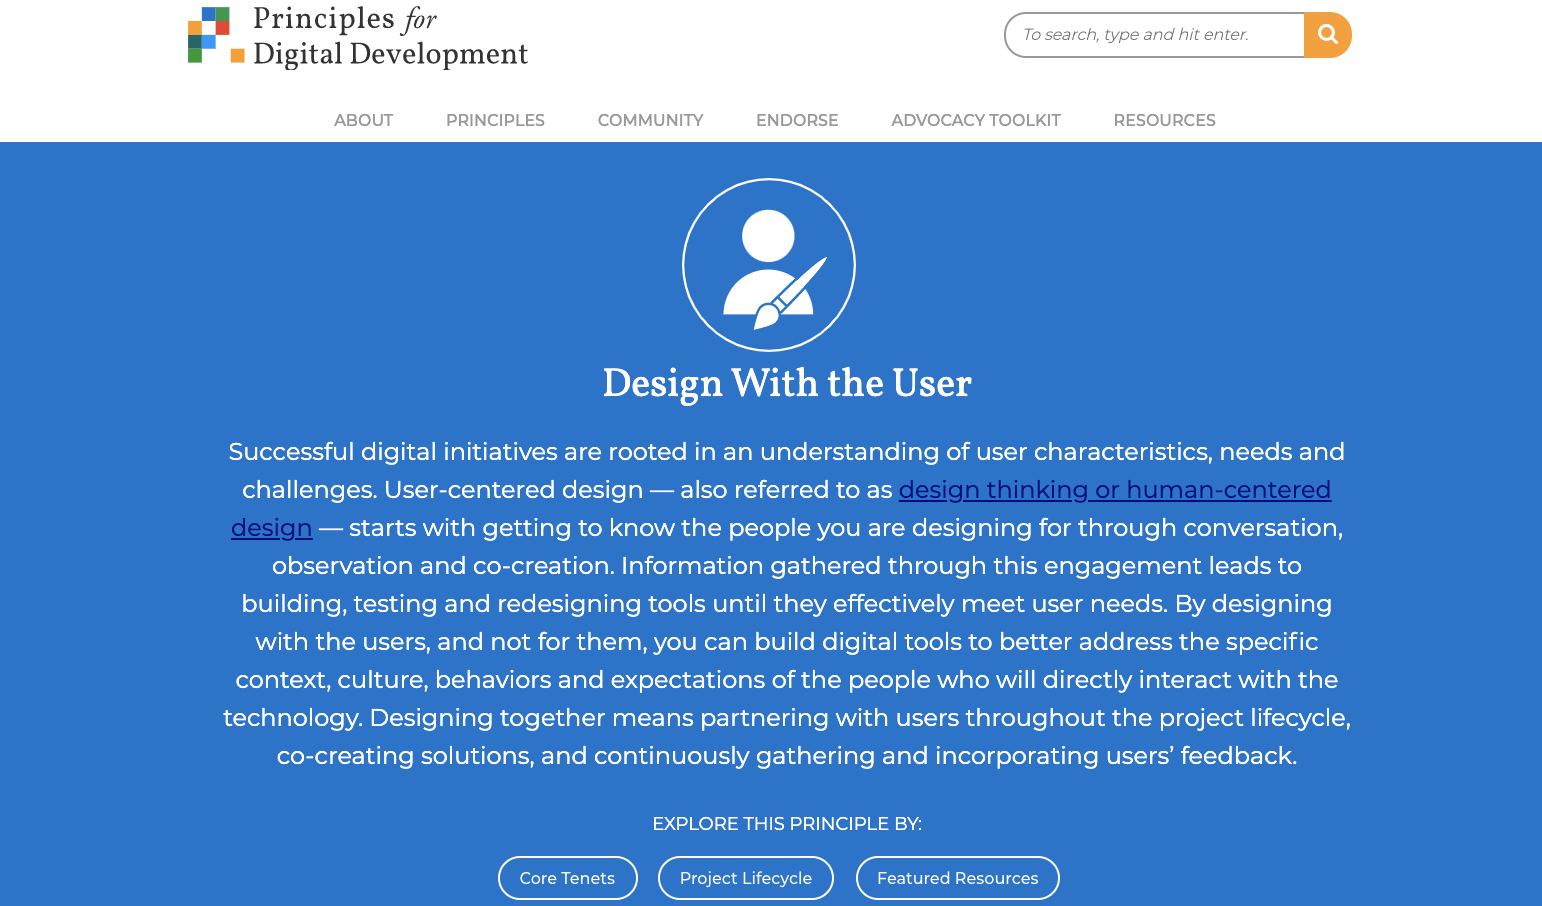 Digital Principles: Design with the User